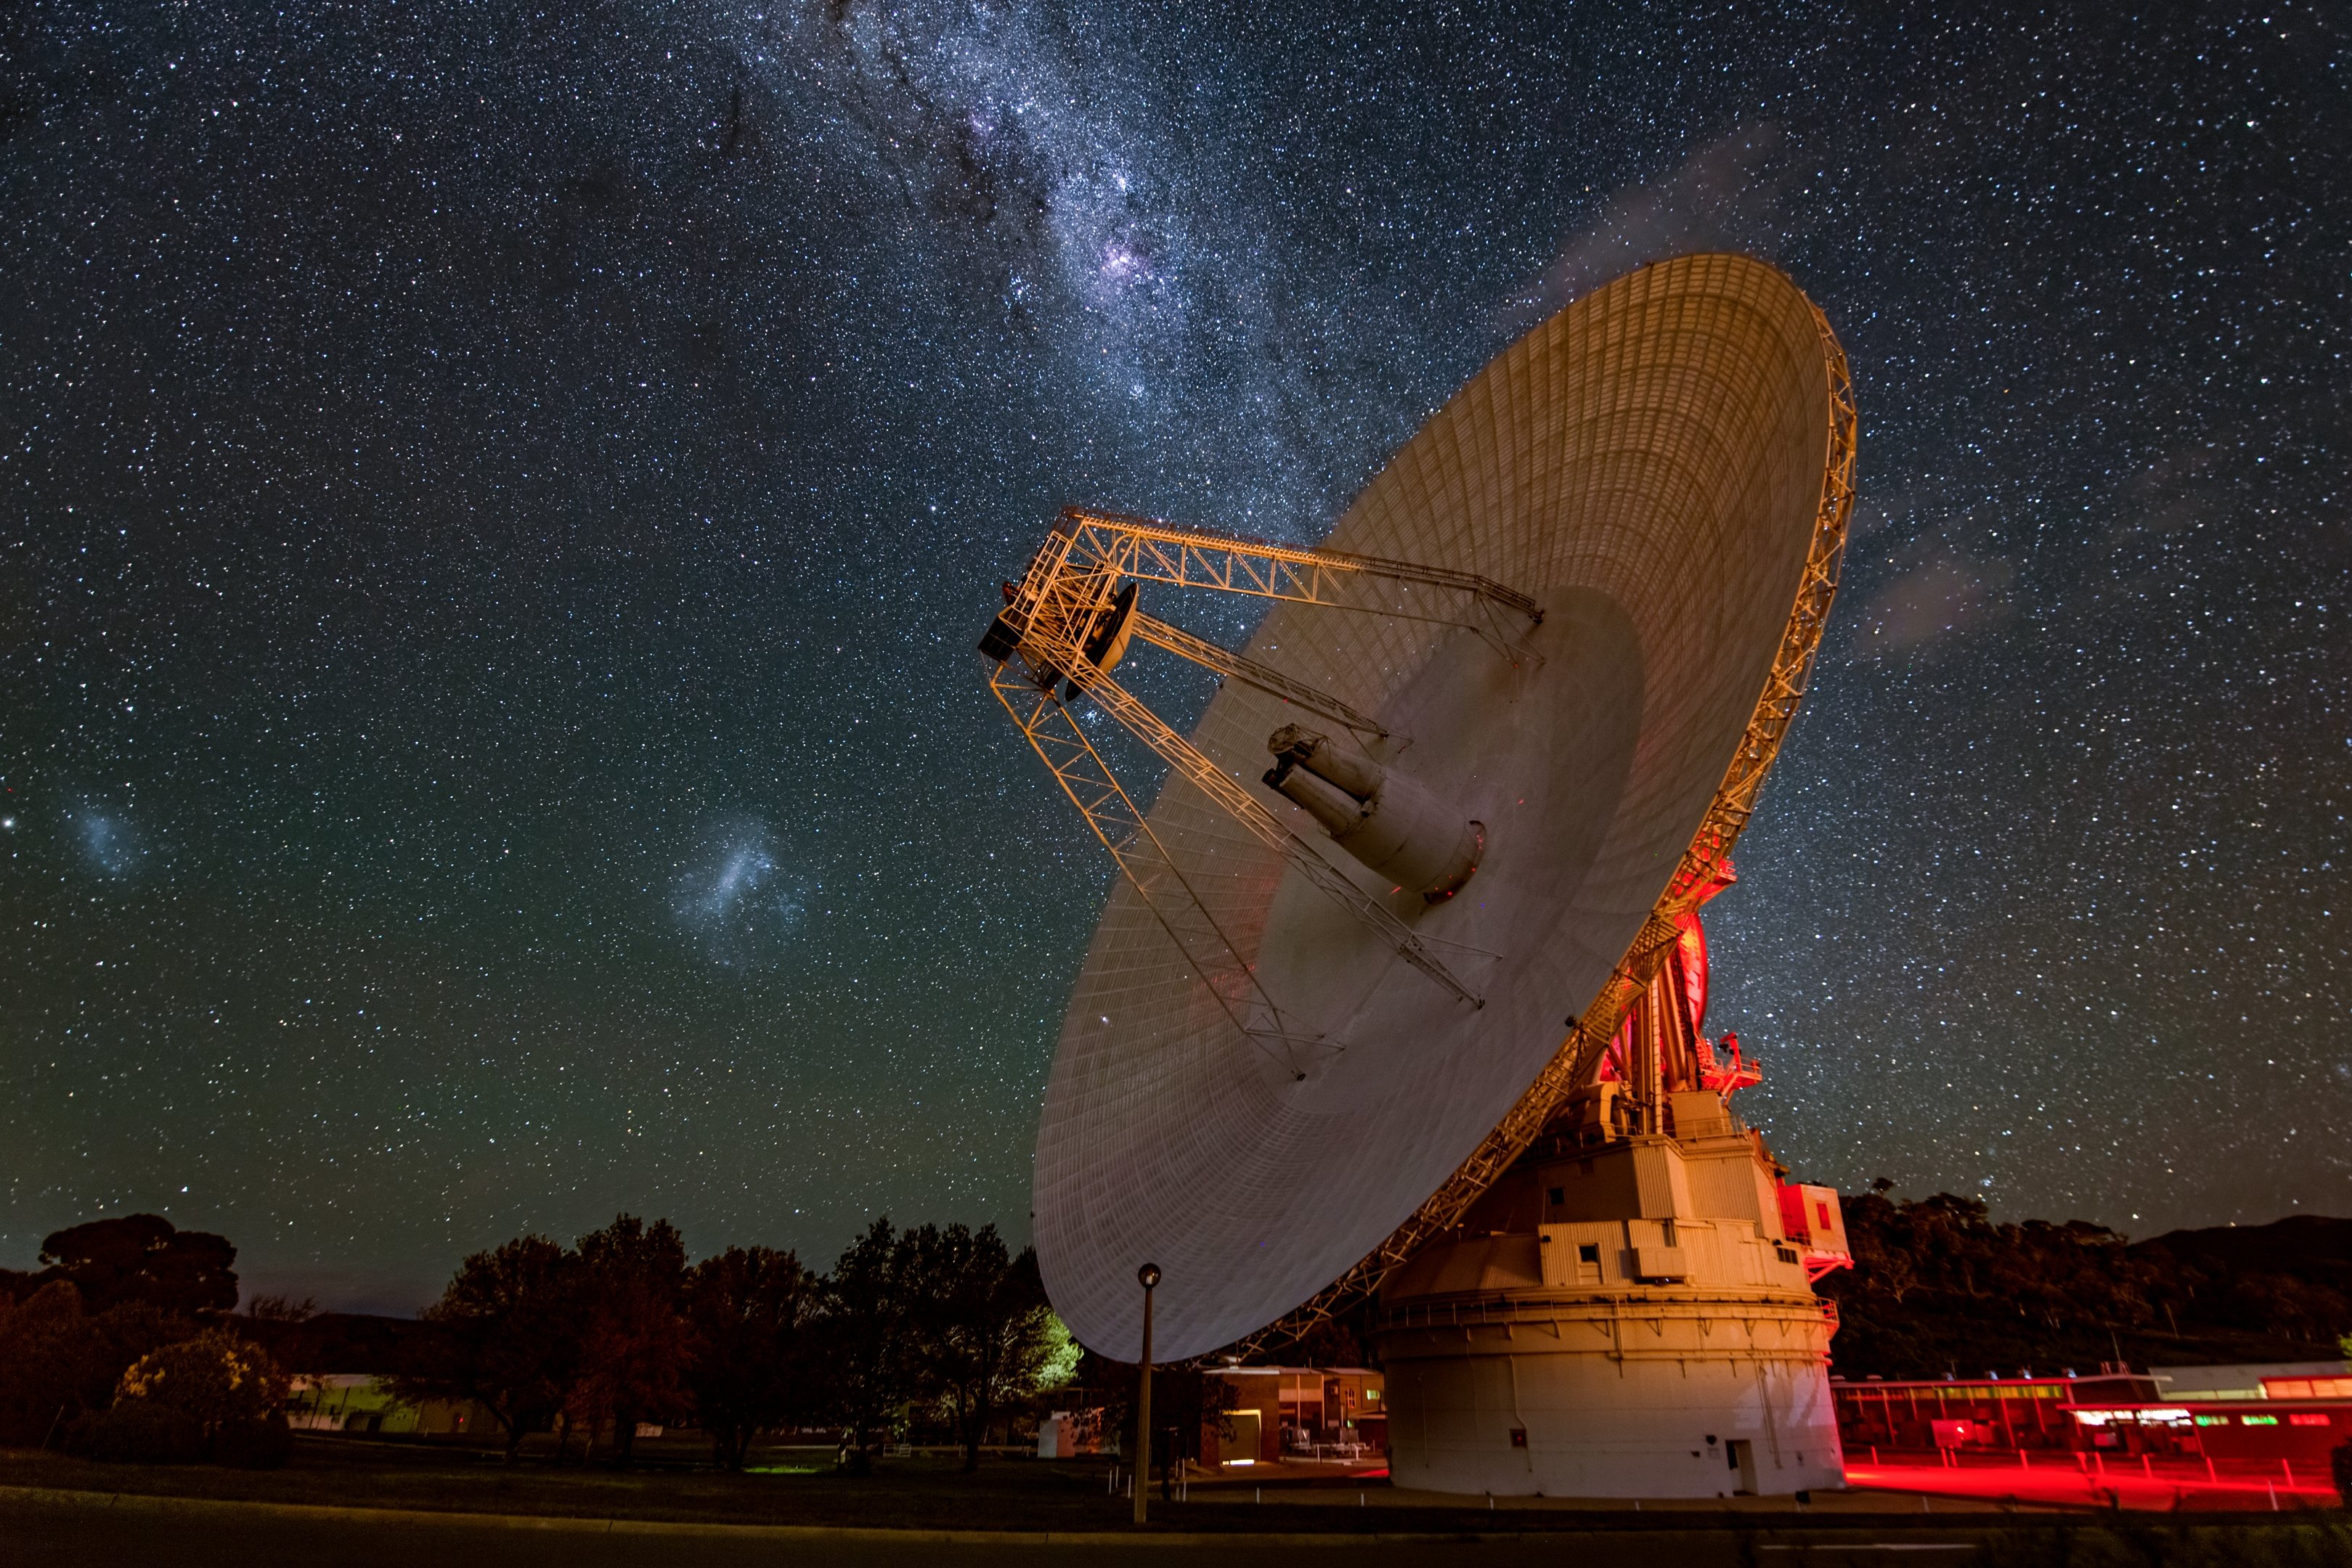 NASA plans new $81 million Canberra dish as skyrocketing space missions cause bottleneck